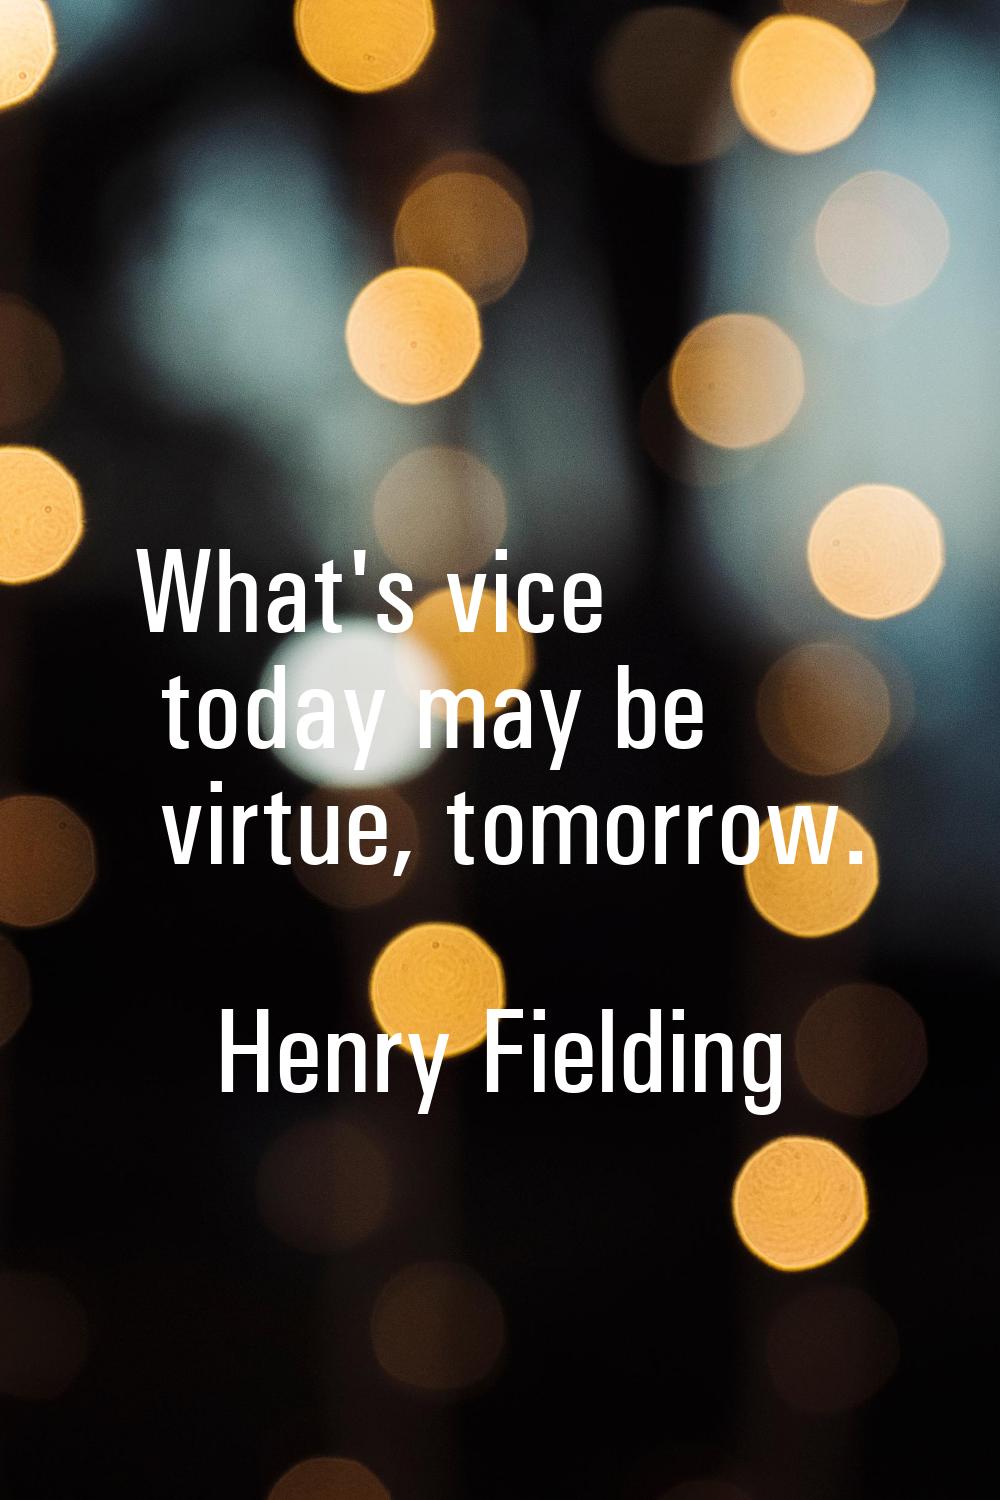 What's vice today may be virtue, tomorrow.